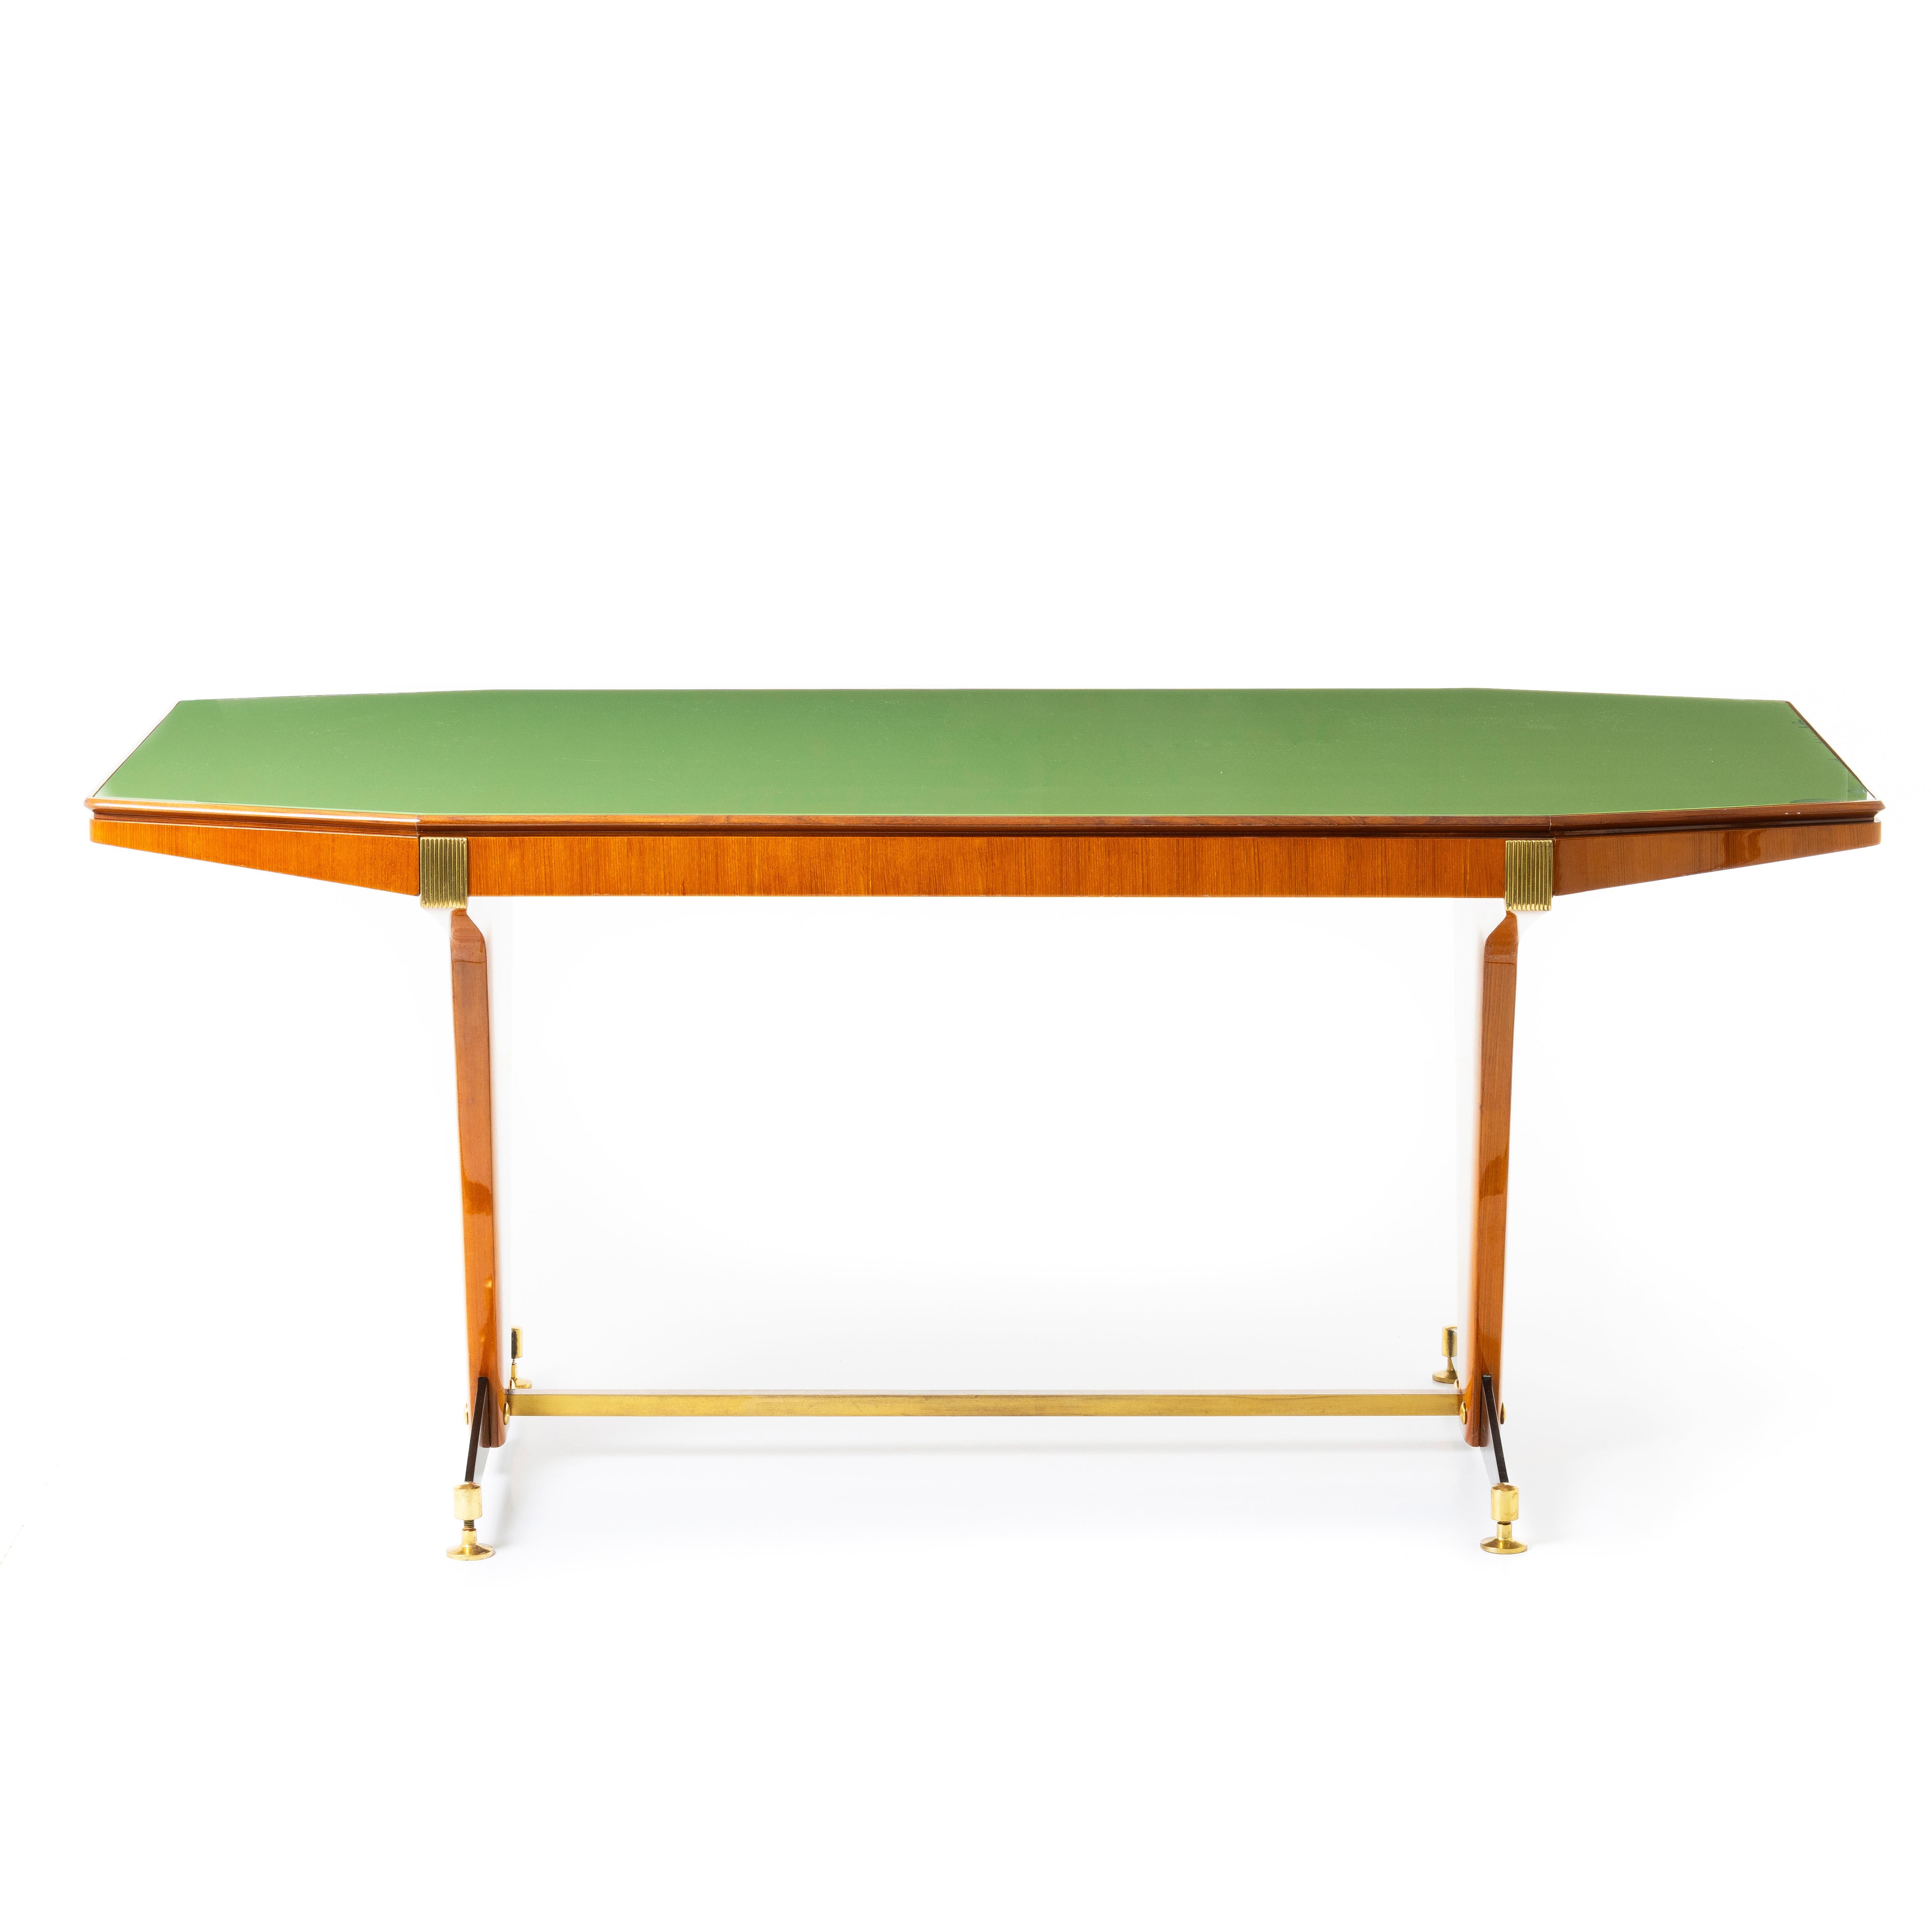 Crafted from rich wood, this table exudes warmth and character, while its sleek lines and minimalist silhouette capture the essence of mid-century modern aesthetics.
Itss exquisite tabletop is adorned with a lustrous green-toned glass surface that